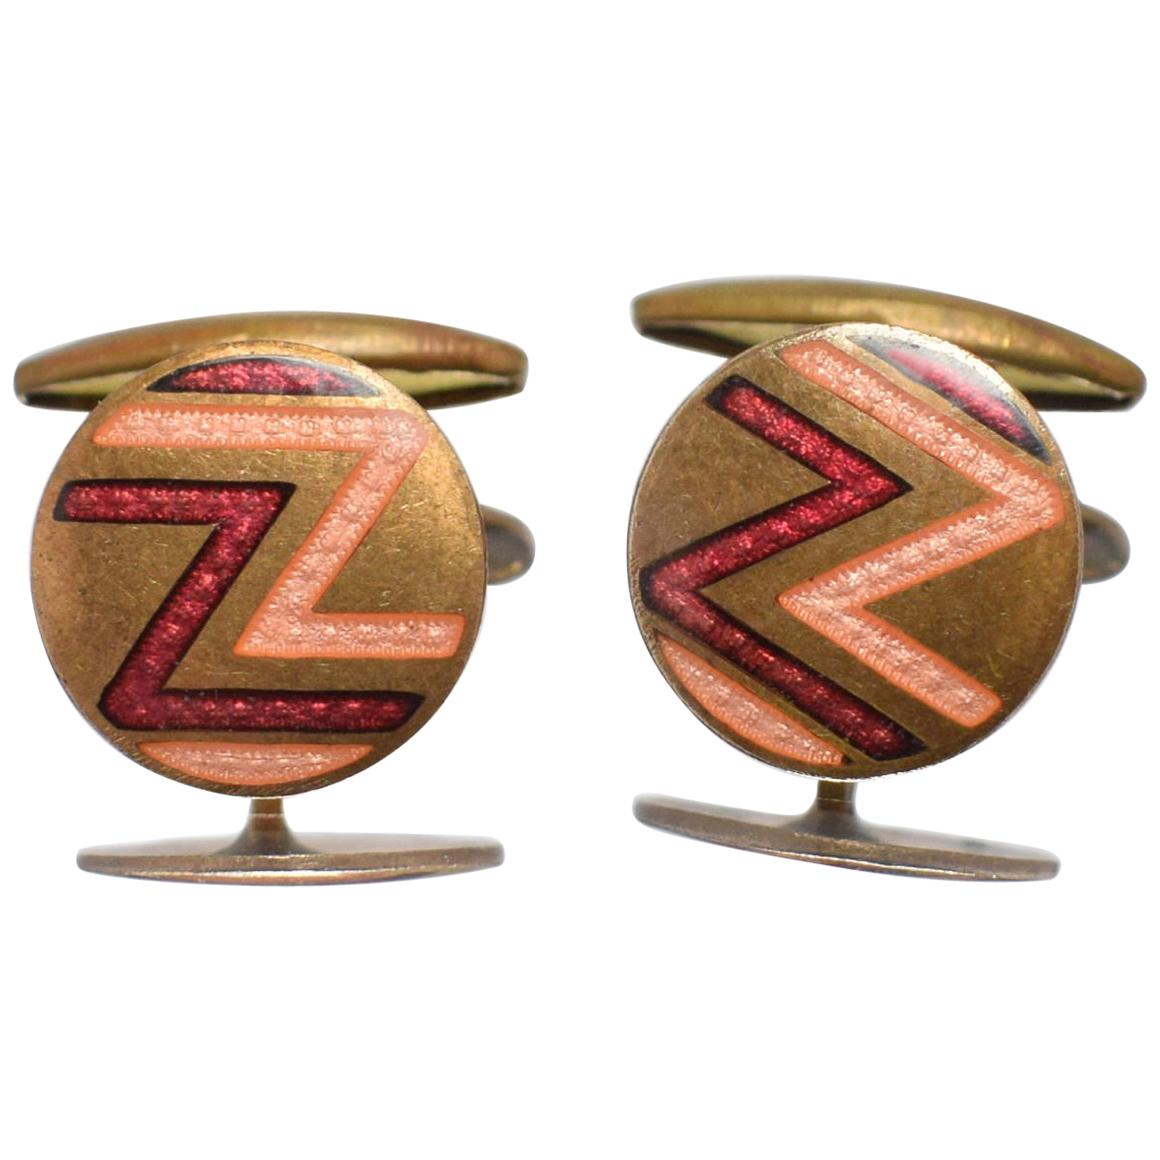 A rare find are these old new stock Art Deco cufflinks from the 1930's, never used and totally original to the period, we have several pairs. Great Art Deco geometric styling and colour, can't be confused with any other era can they? Condition is